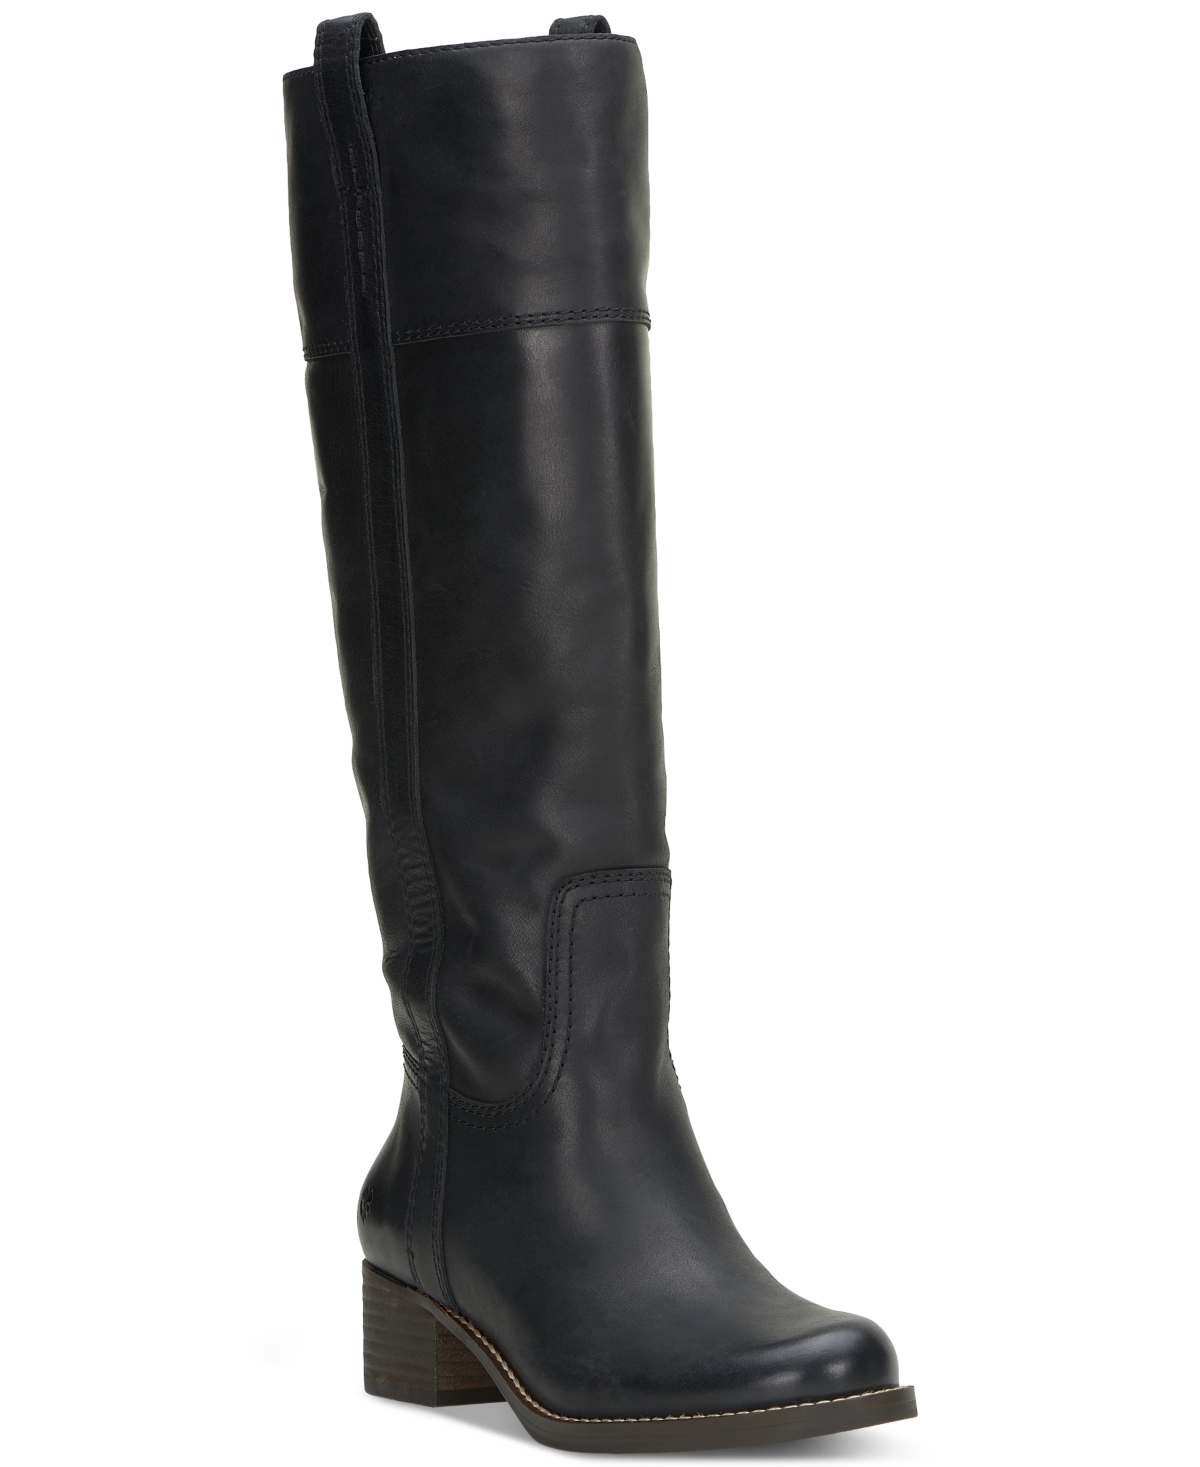 Women's Hybiscus Knee-High Riding Boots - Silver Cloud Leather